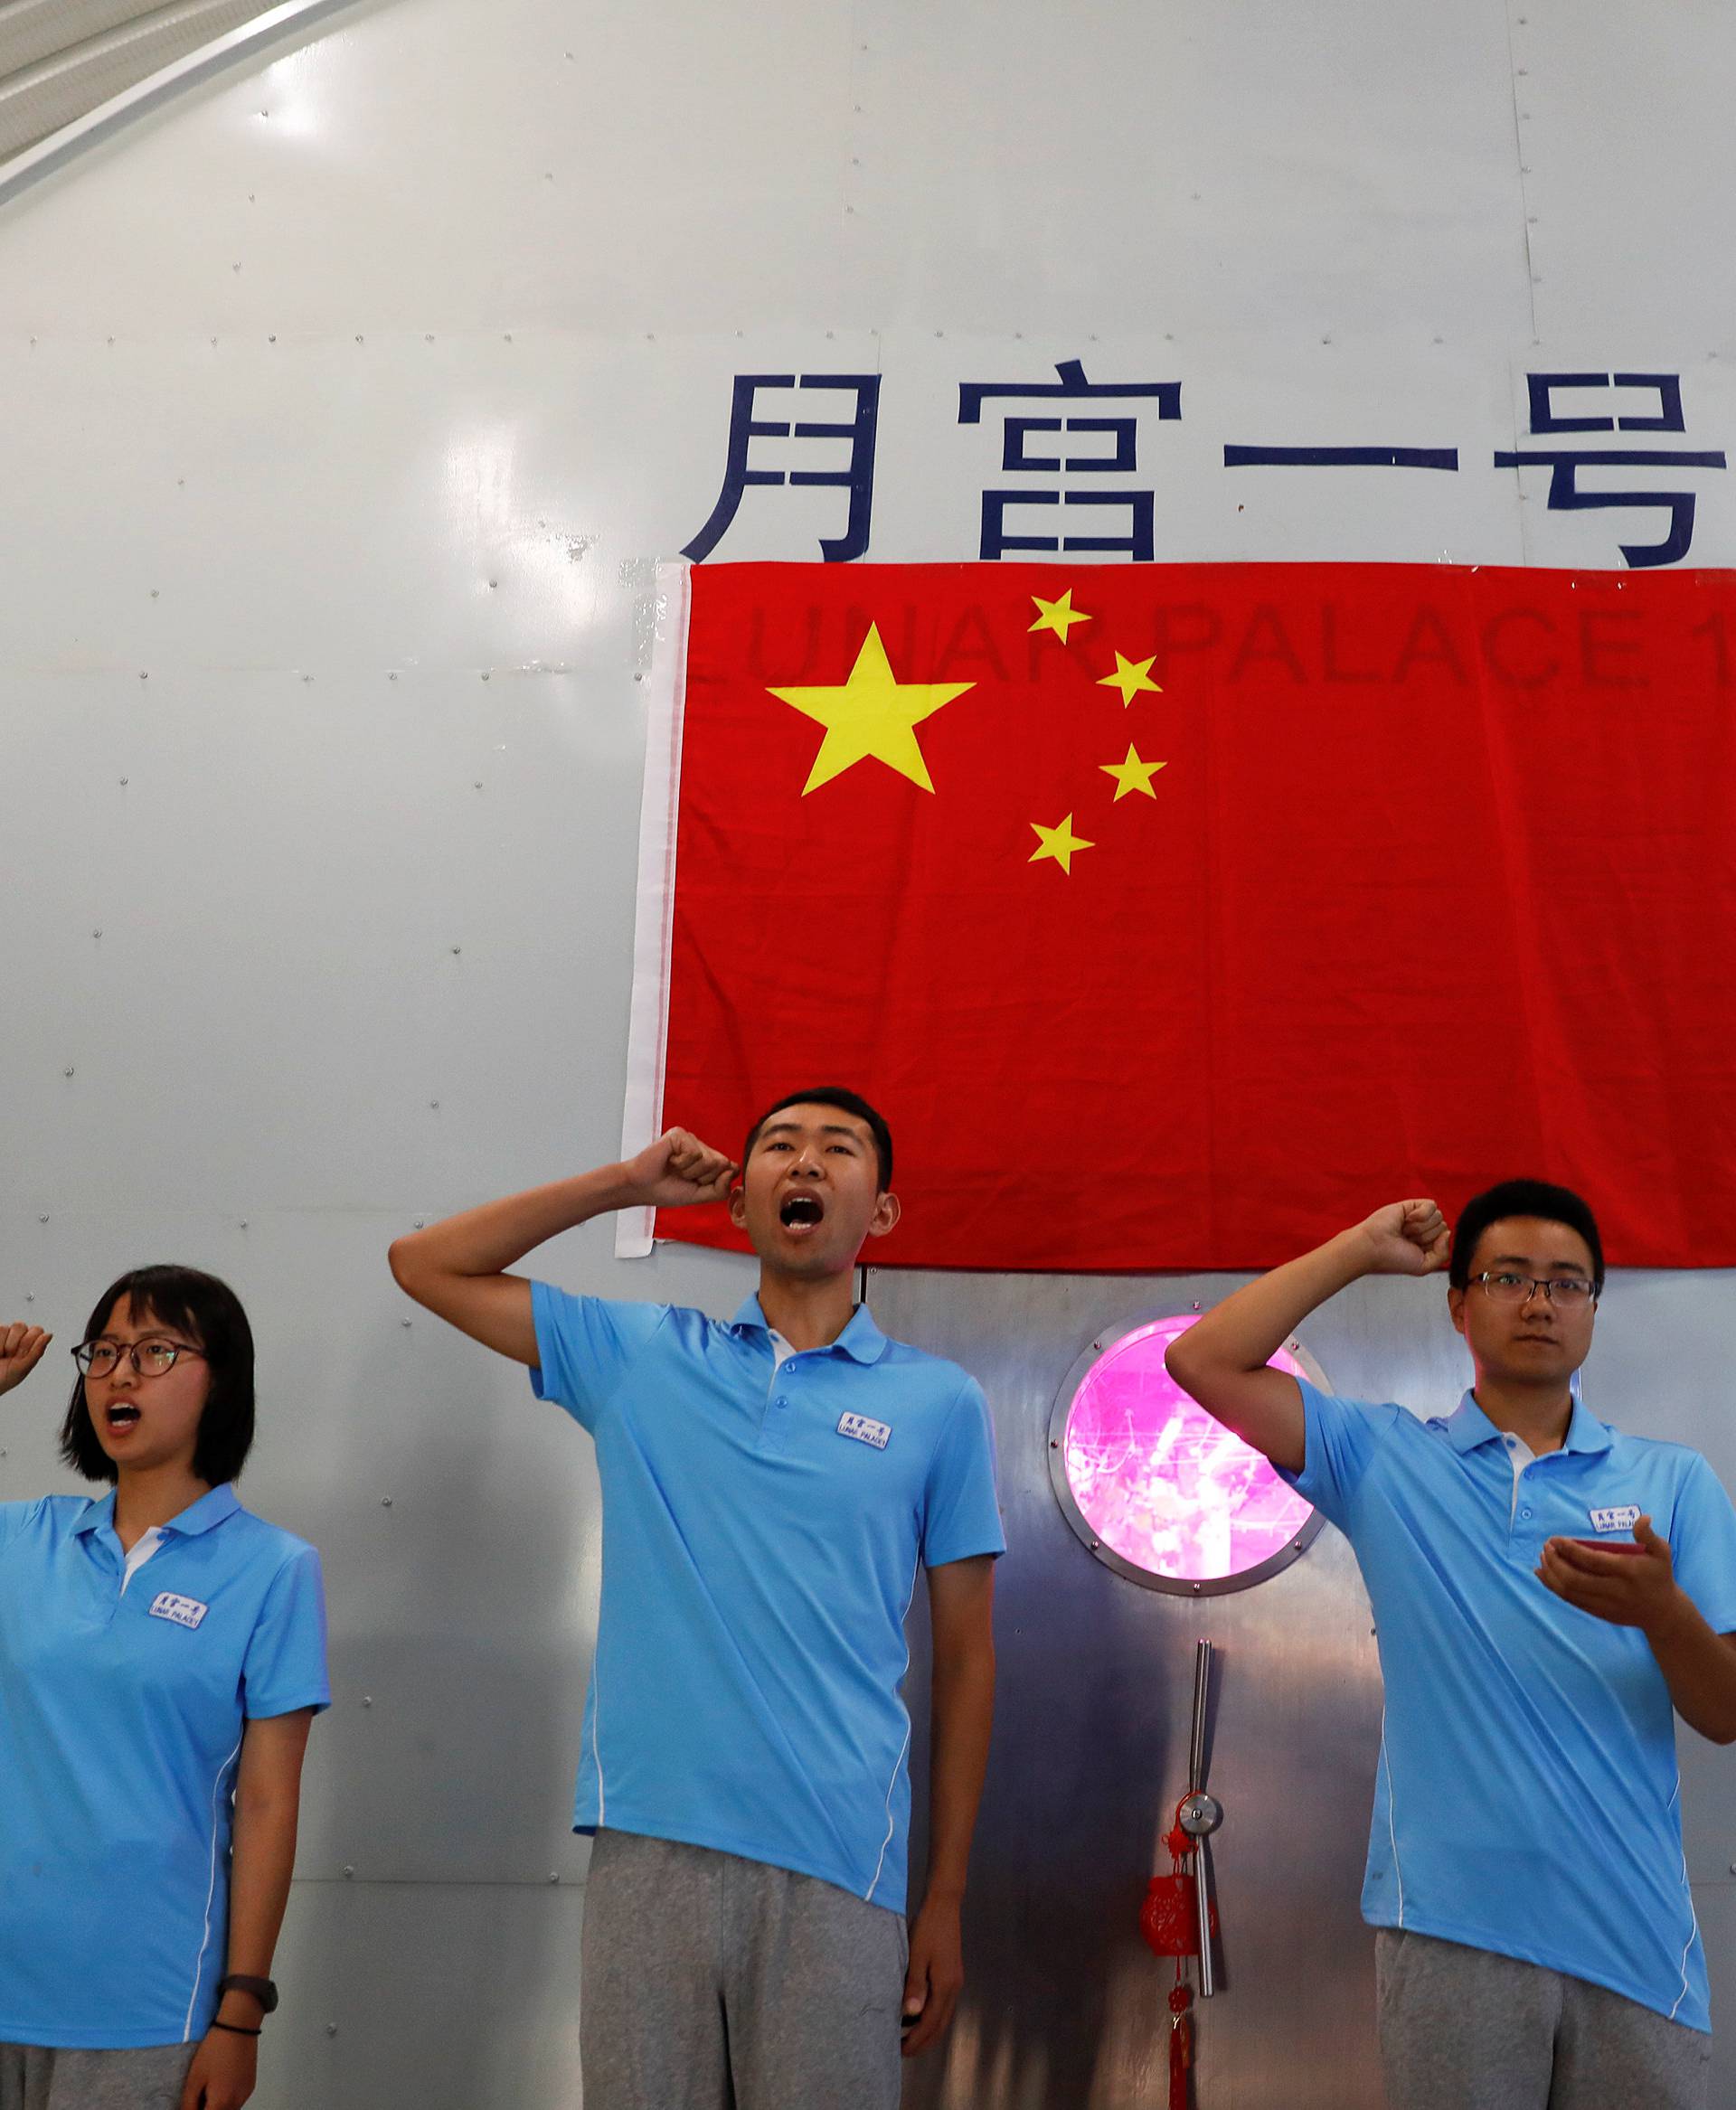 Volunteers take an oath before entering a simulated space cabin in which they will temporarily live as a part of the scientistic Lunar Palace 365 Project, at Beihang University in Beijing